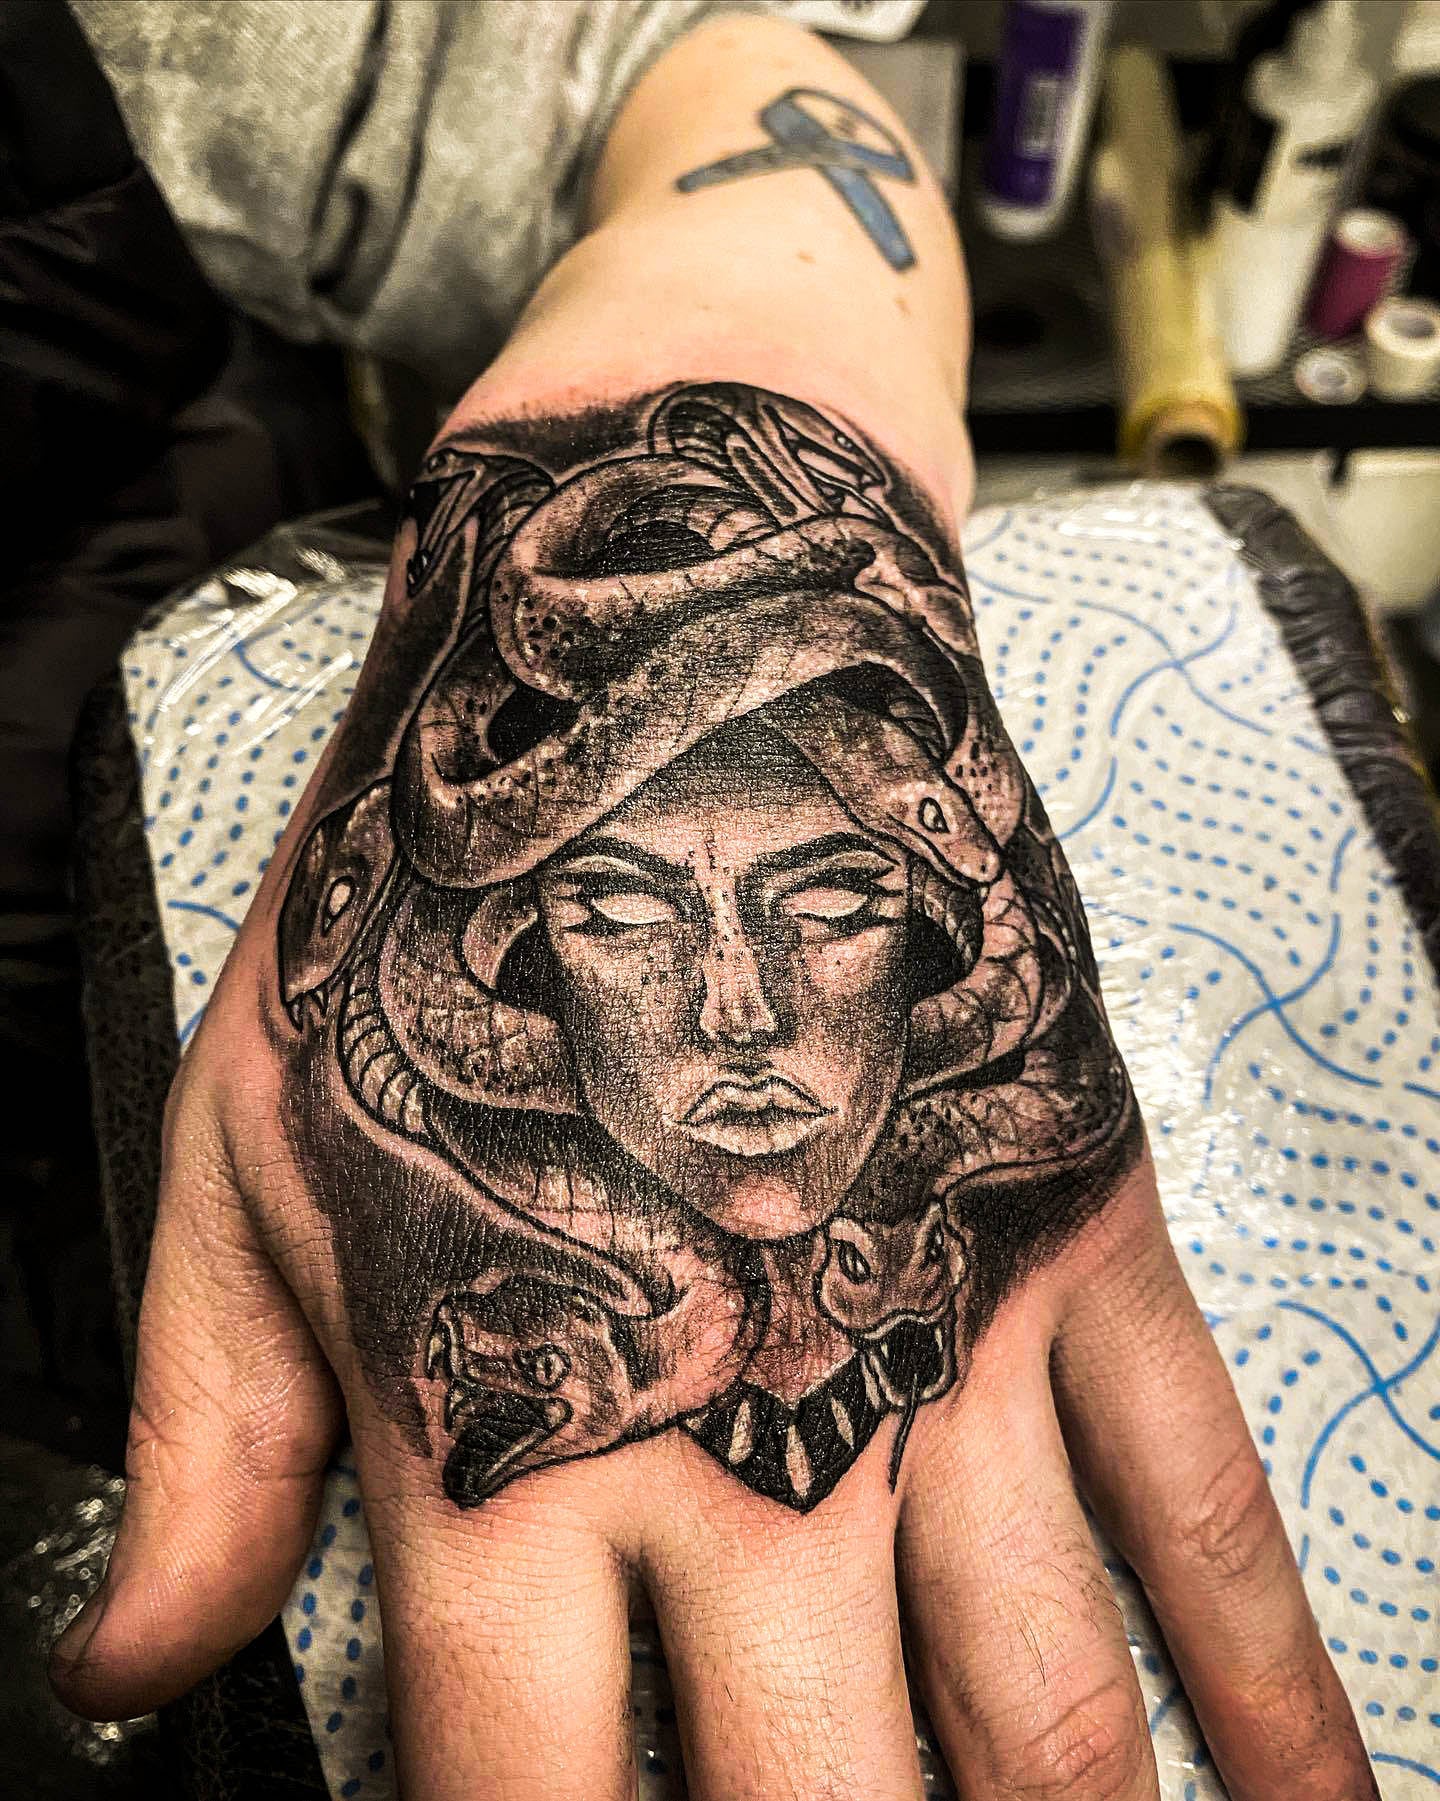 30+ Medusa Tattoos That Will Give Everyone Nightmares - 100 Tattoos | Medusa  tattoo design, Medusa tattoo, Hand tattoos